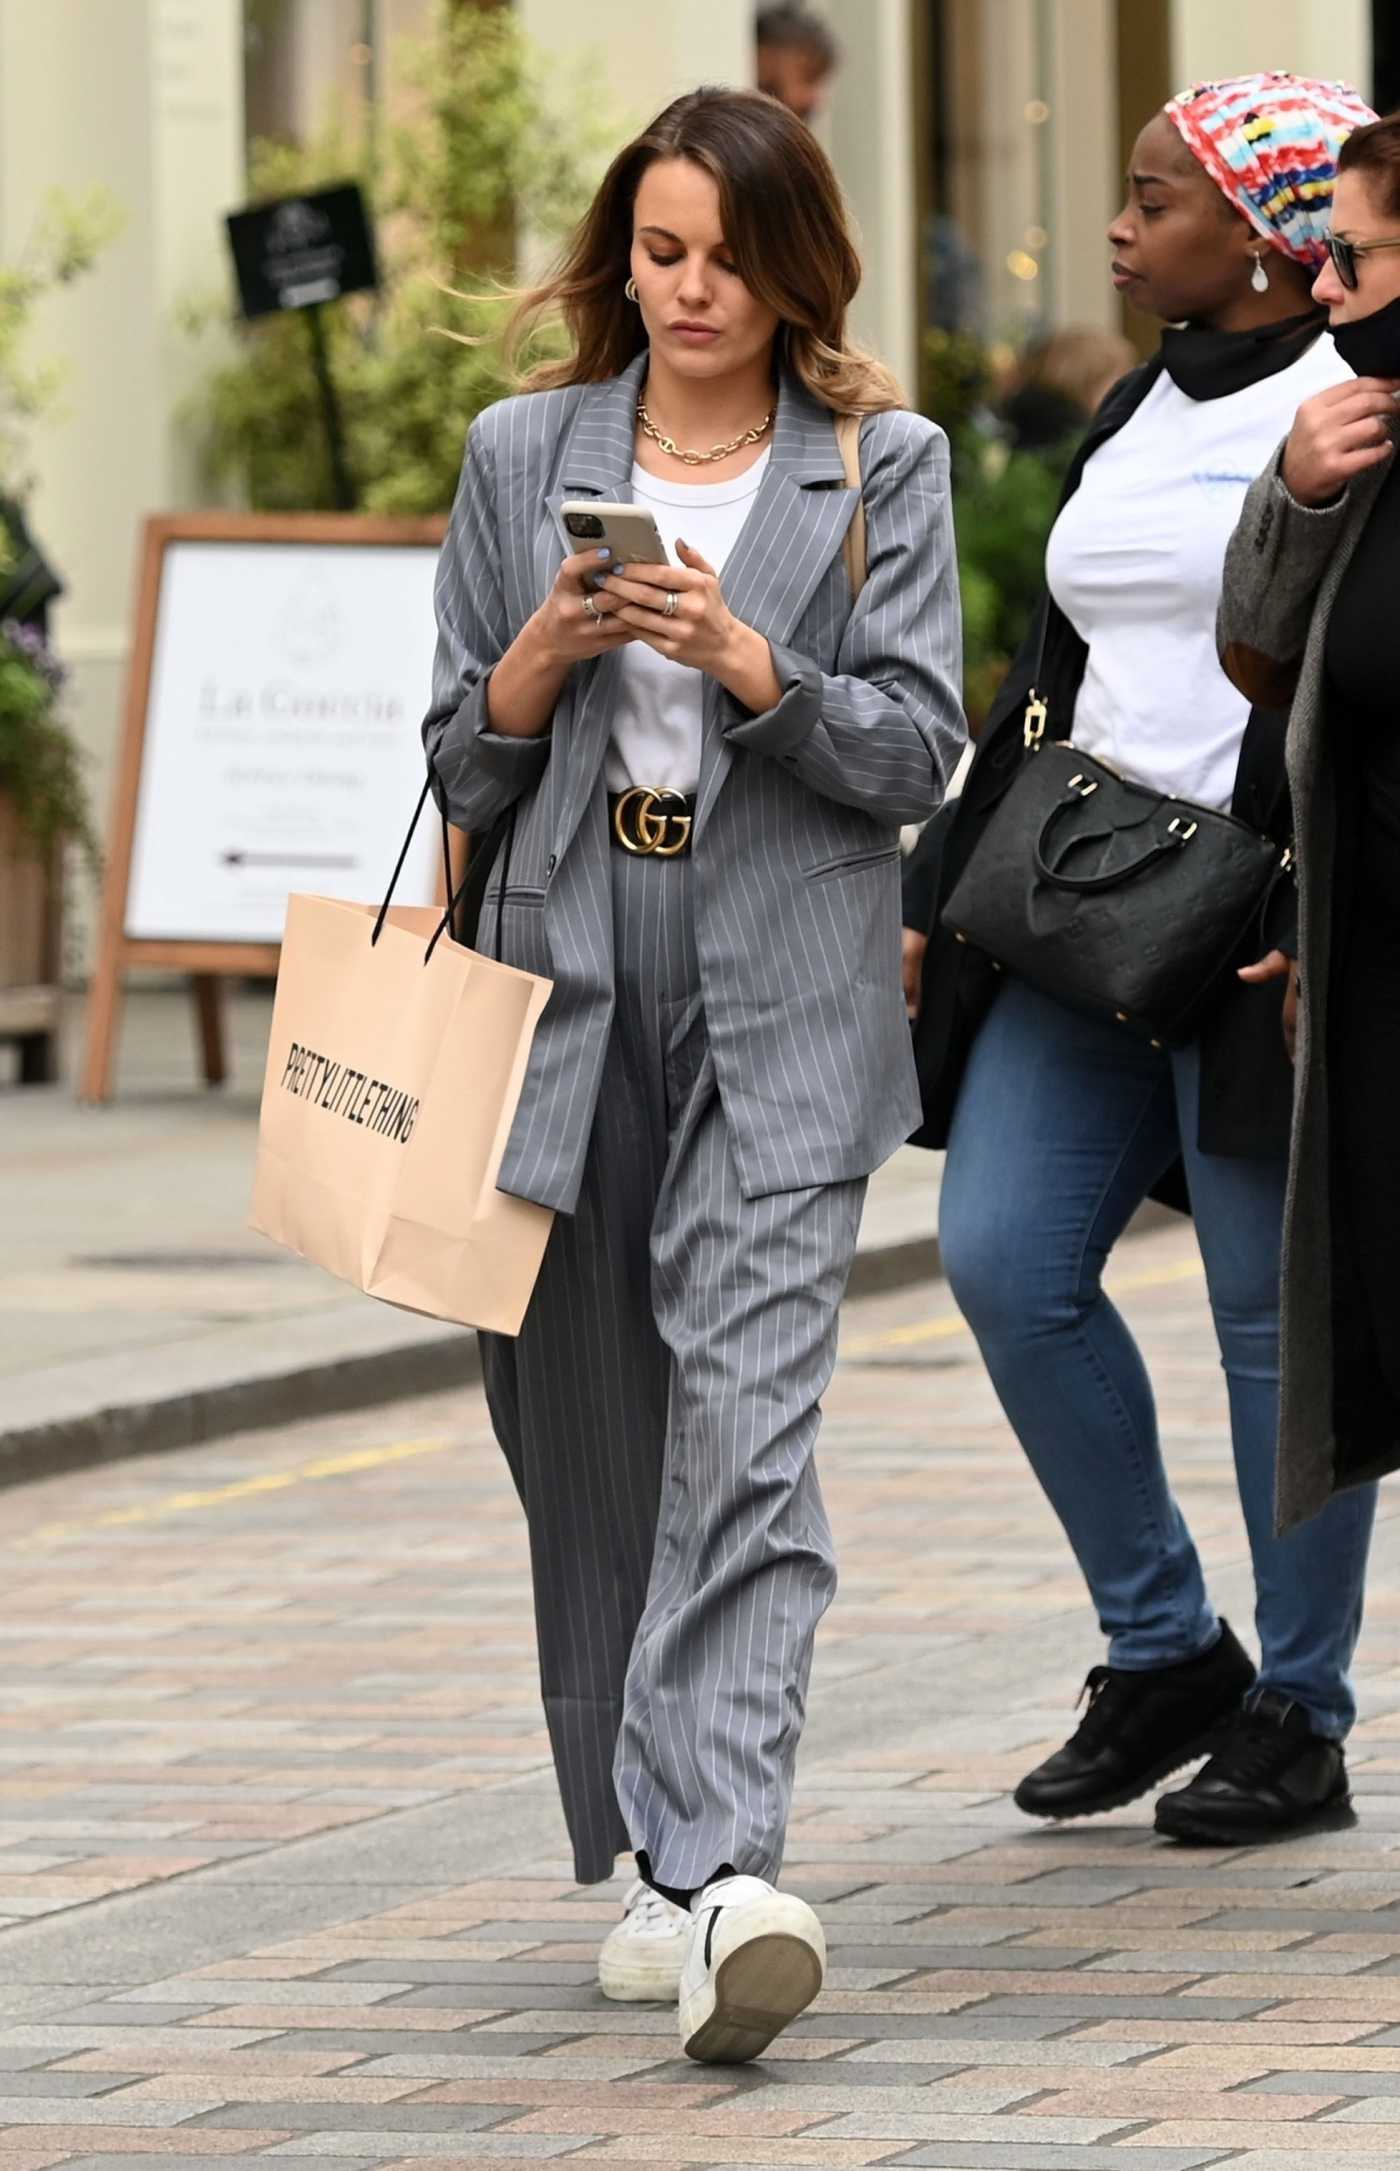 Emily Blackwell in a Grey Striped Suit Arrives at the Petersham Nurseries in Covent Garden in London